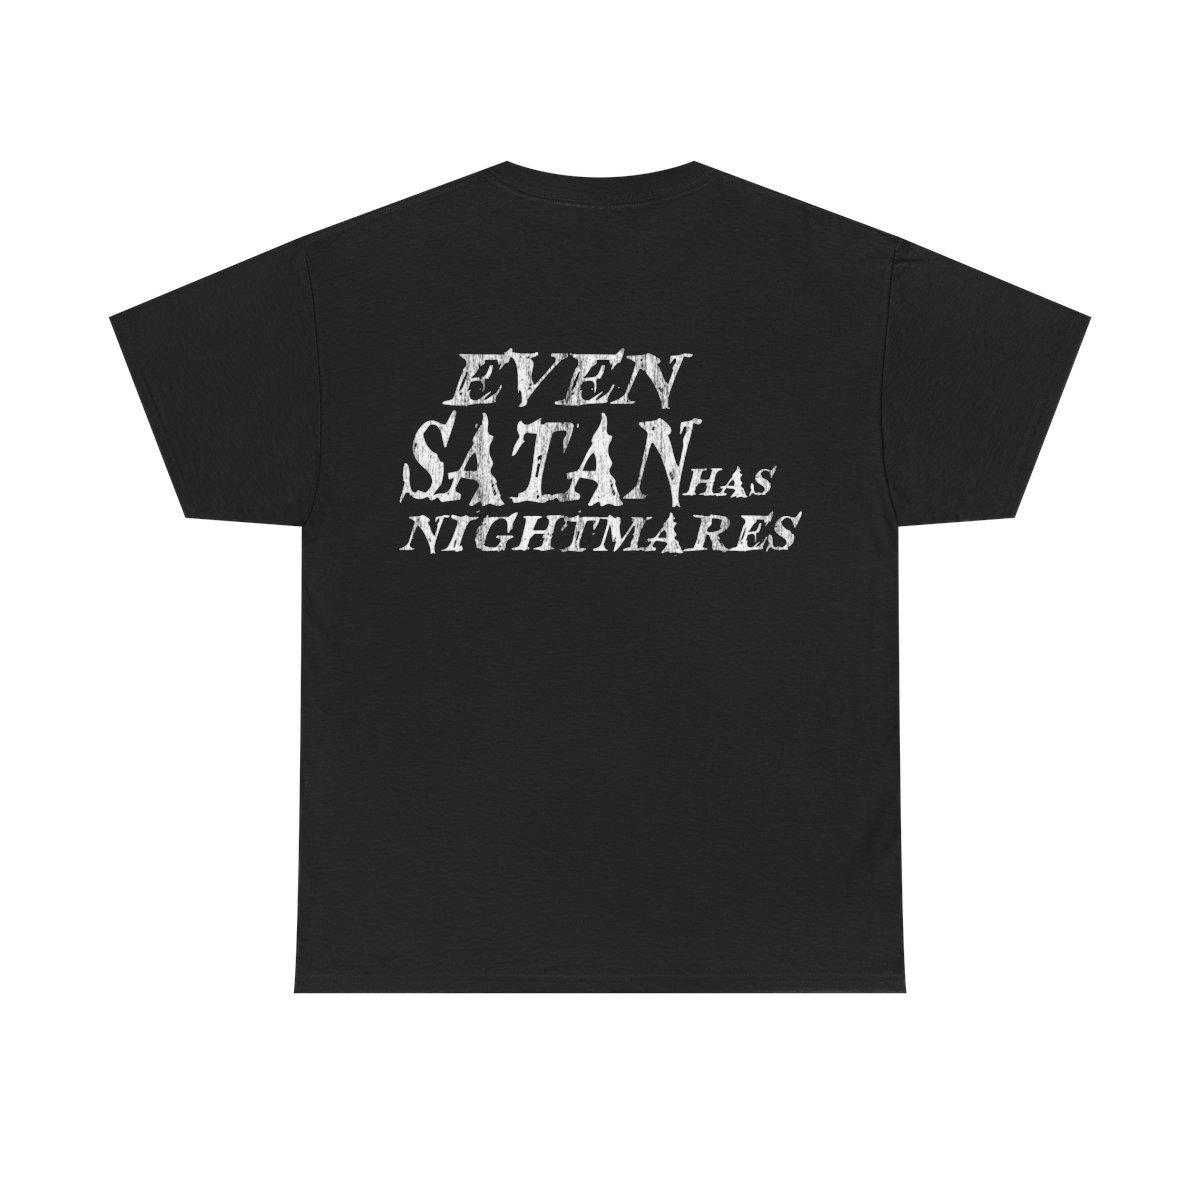 Frost Like Ashes Nightmares Short Sleeve Tshirt (2-Sided)